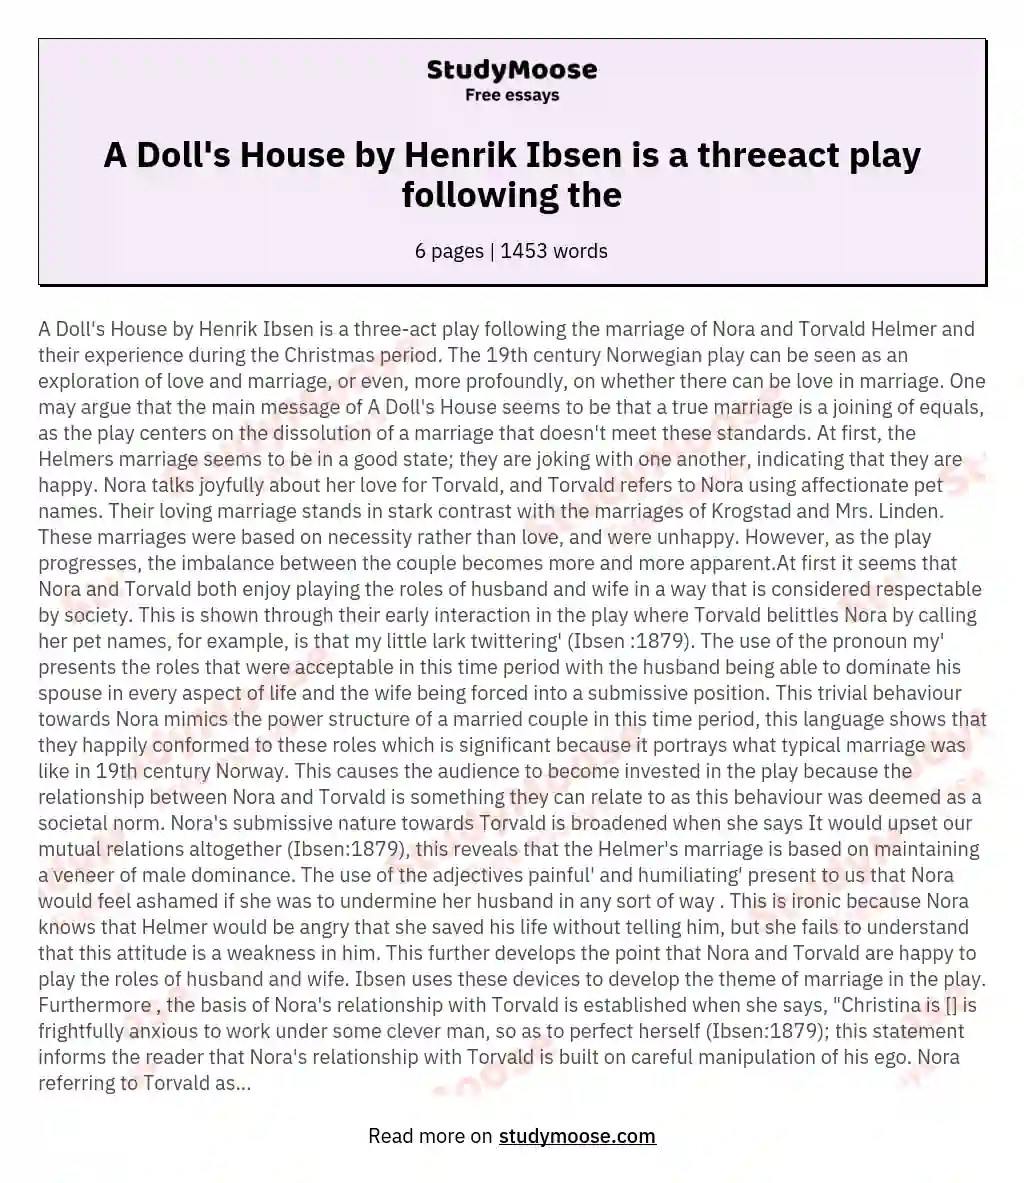 A Doll's House by Henrik Ibsen is a threeact play following the